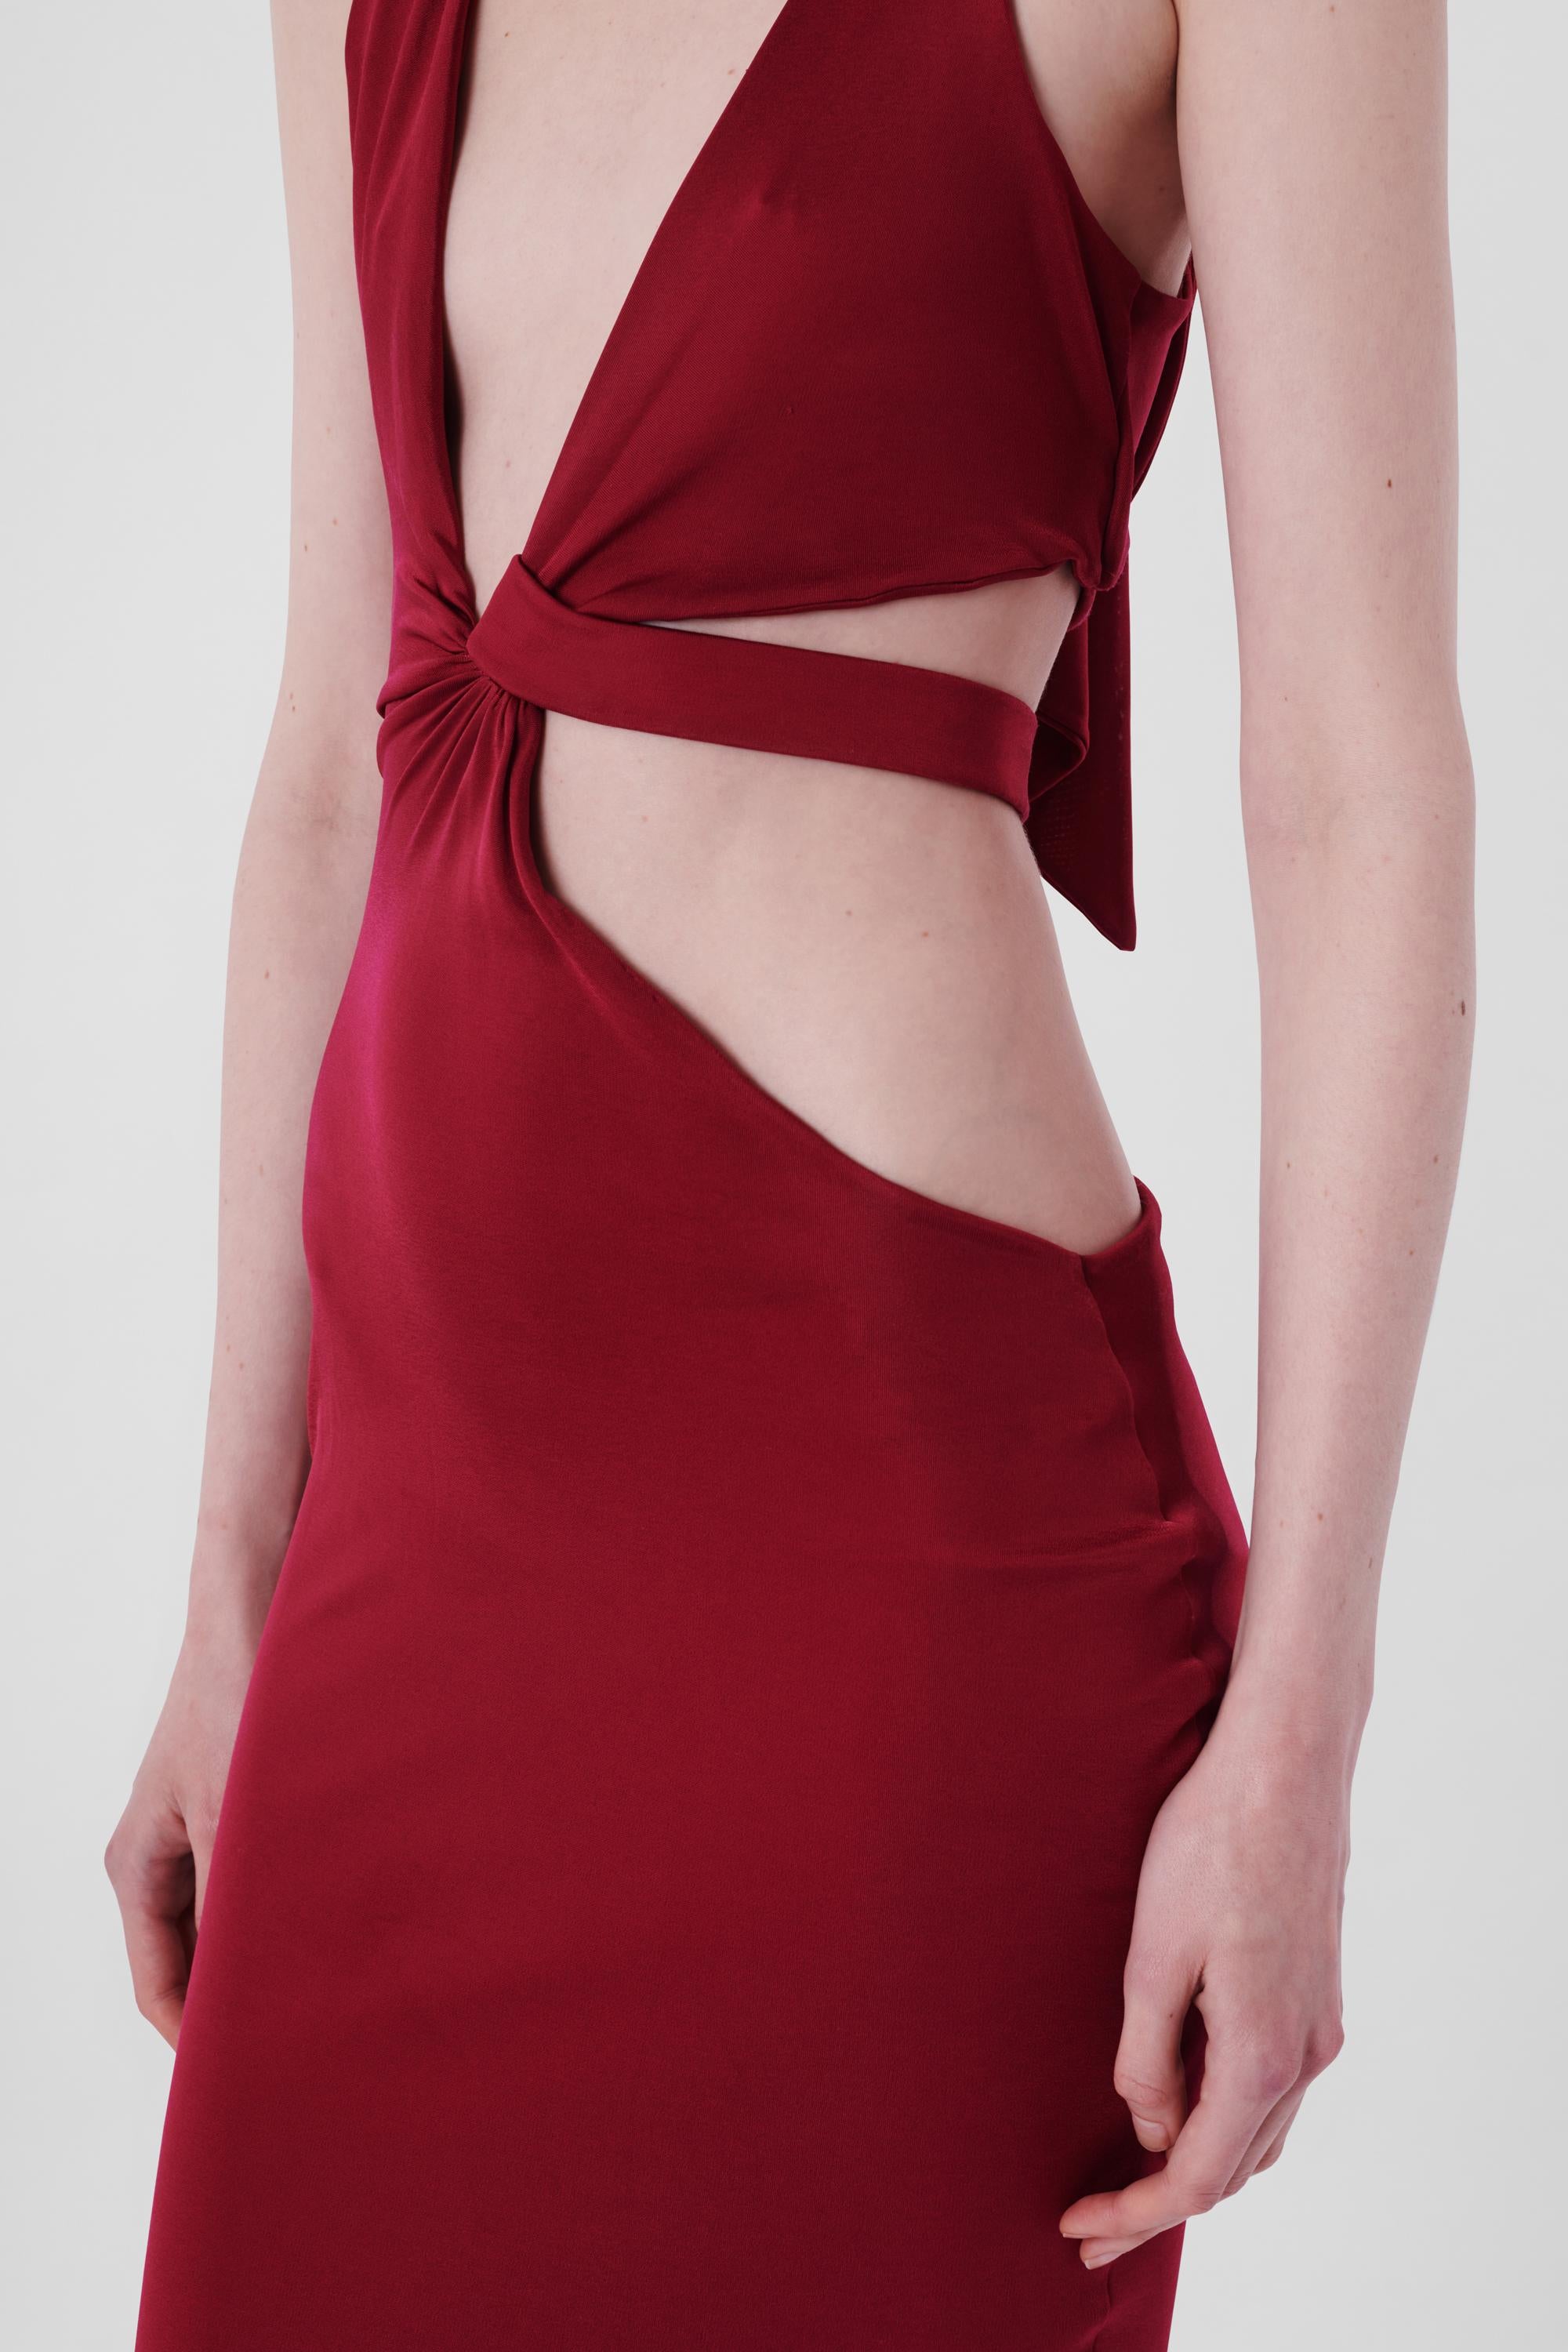 Gucci by Tom Ford F/W 2004 Maroon Cutout Bodycon Dress. Features cutout design, halter neck with adjustable strap and midi length.

Brand: Gucci
Size: UK 6
Label size: Small
Modern size: UK: 6 to 8, US: 0 to 2, EU: 34 to 36
Fabric: Viscose,